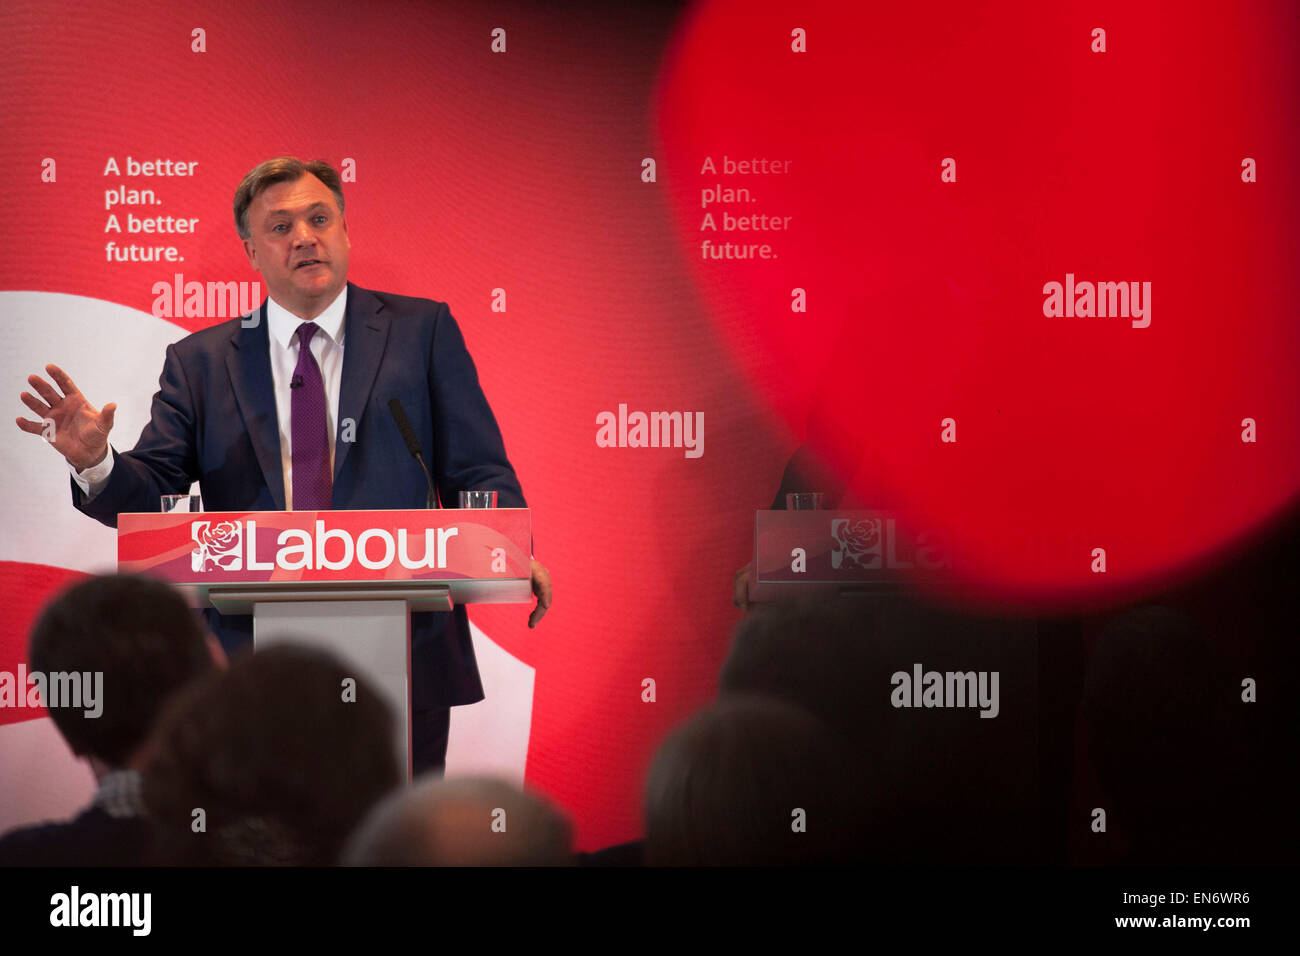 London, UK. Wednesday 29th April 2015. Labour Party Shadow Chancellor Ed Balls speaks at a General Election 2015 campaign event on the Tory threat to family finances, entitled: The Tories’ Secret Plan. Held at the Royal Institute of British Architects. Credit:  Michael Kemp/Alamy Live News Stock Photo